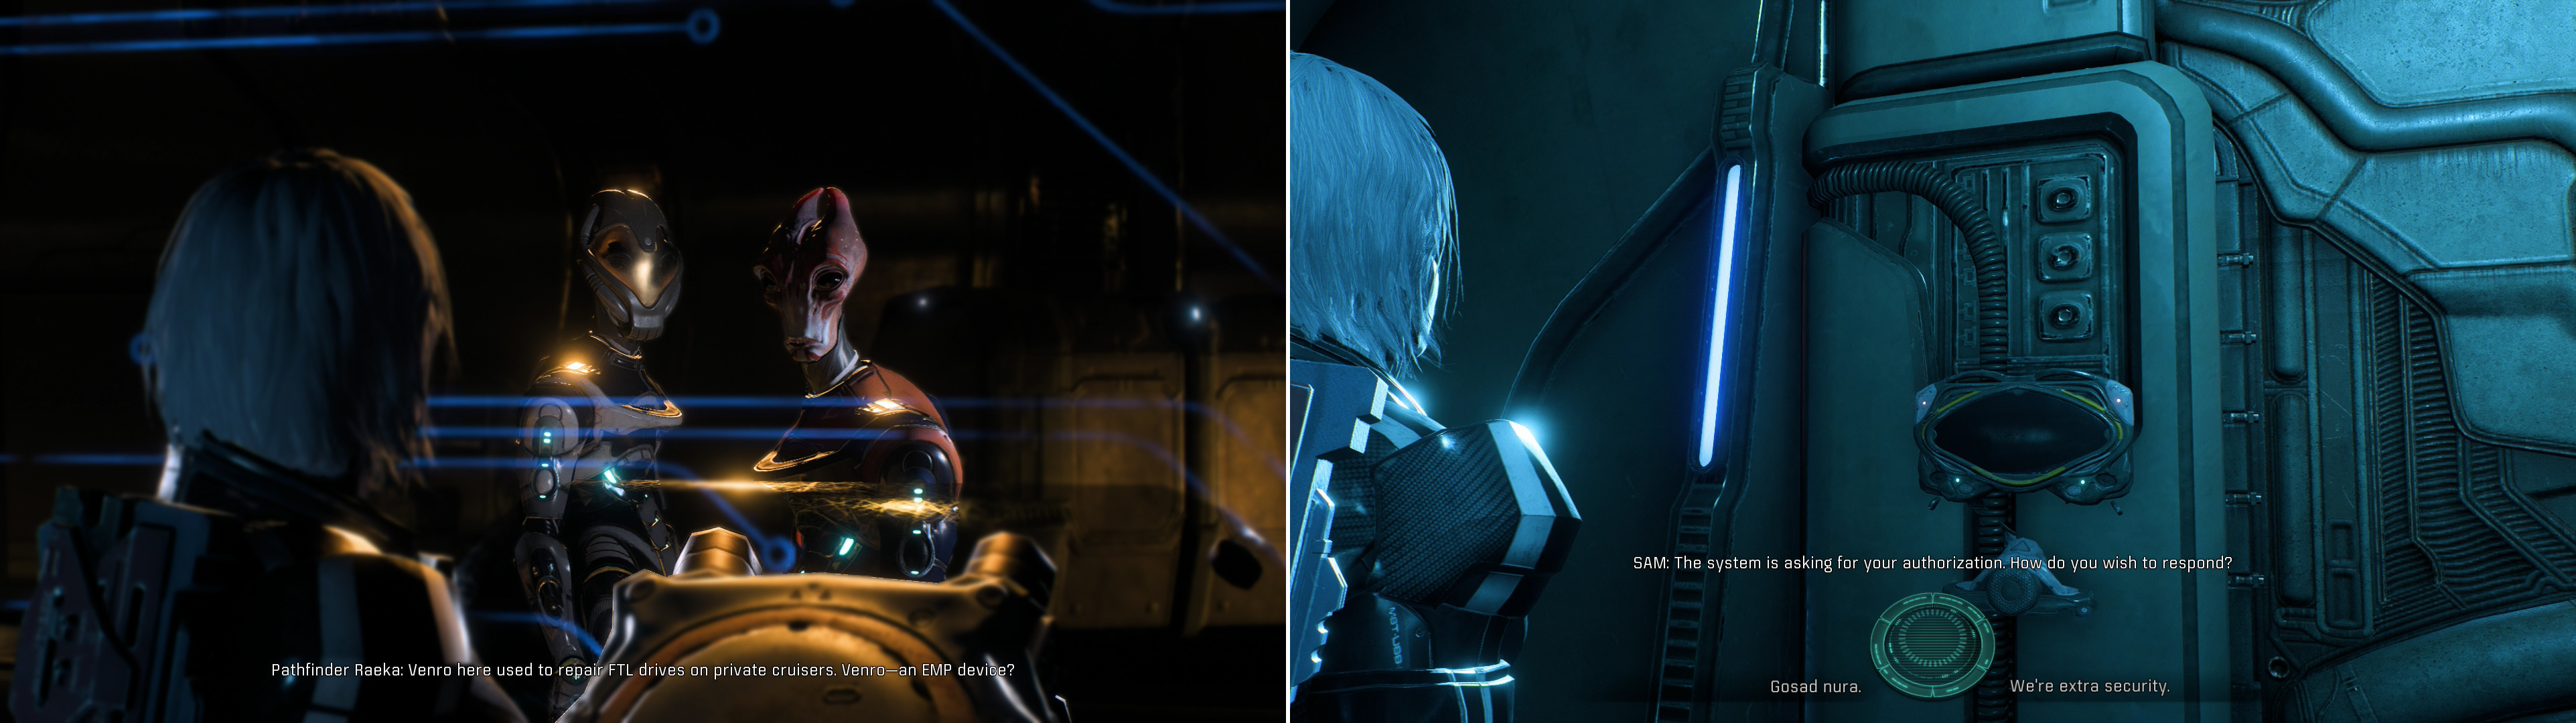 Rendezvous with Pathfinder Raeka, who fortunately has a solution for the Kett’s superior firepower (left). To get deeper into the flagship, you’ll need to use SAM to imitate Kett vocalizations (right).